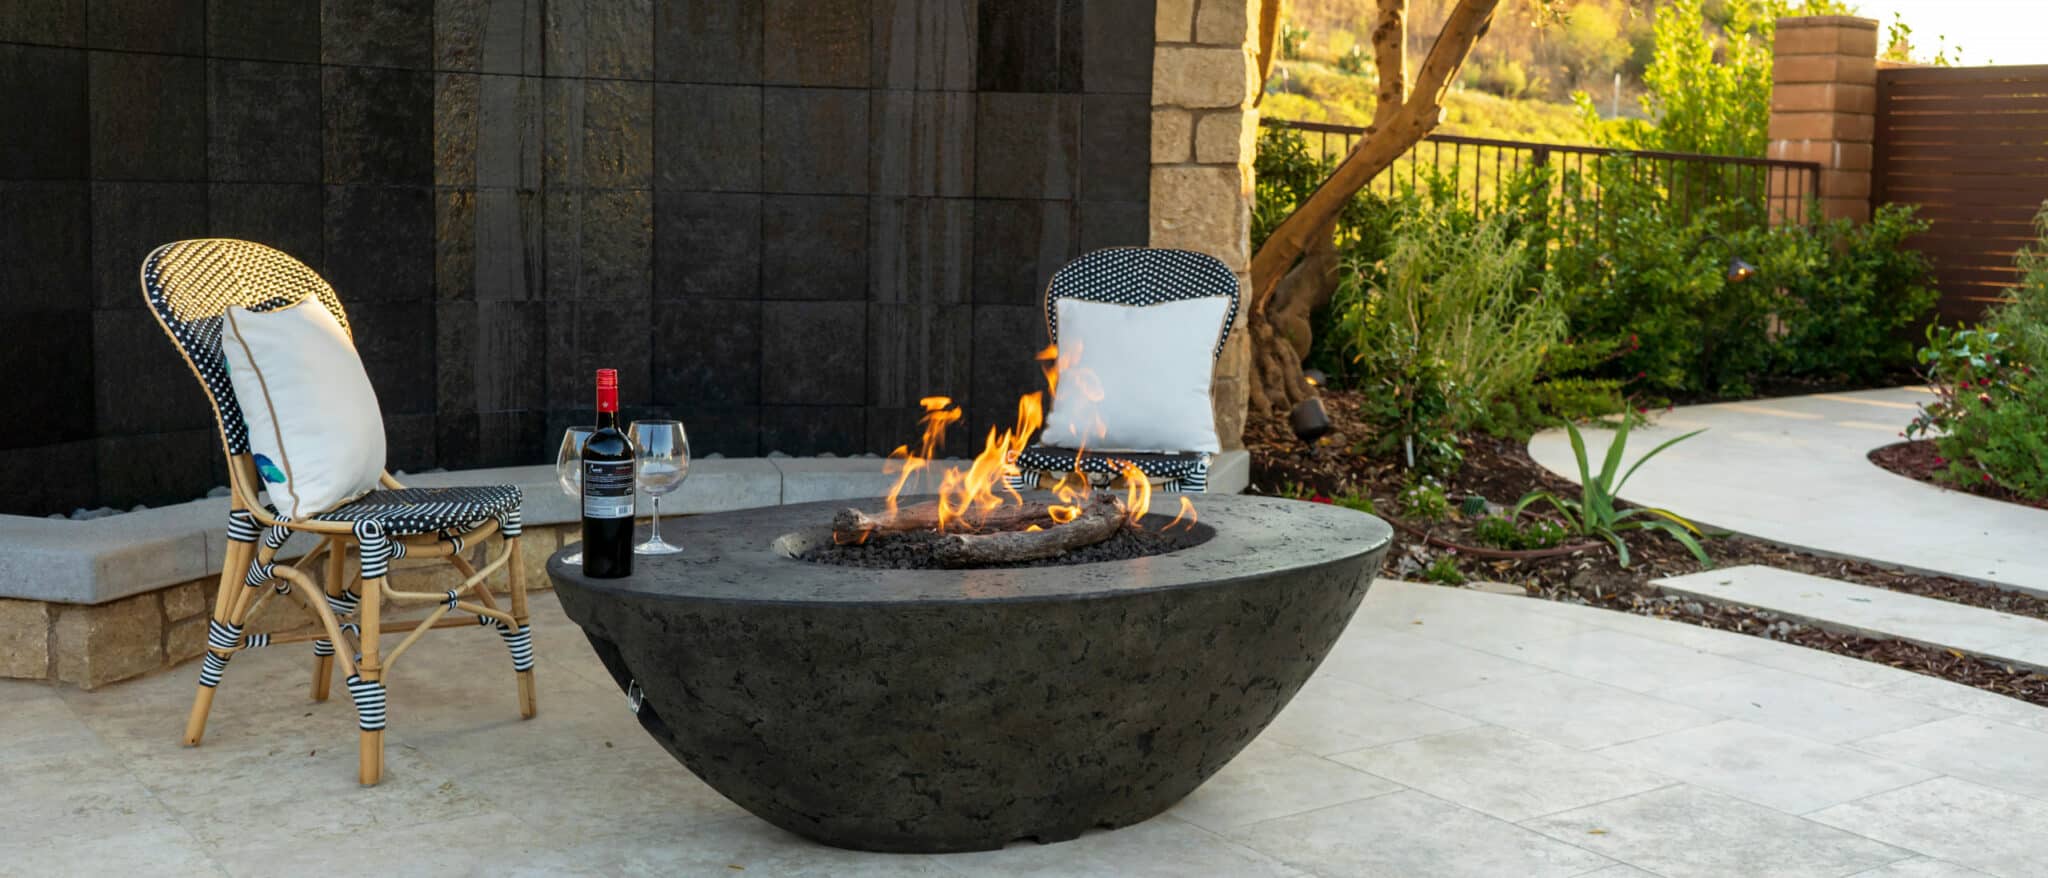 Details about   Round Shaped Patio Fire Pit Outdoor Home Garden Backyard Firepit Bowl Fireplace 